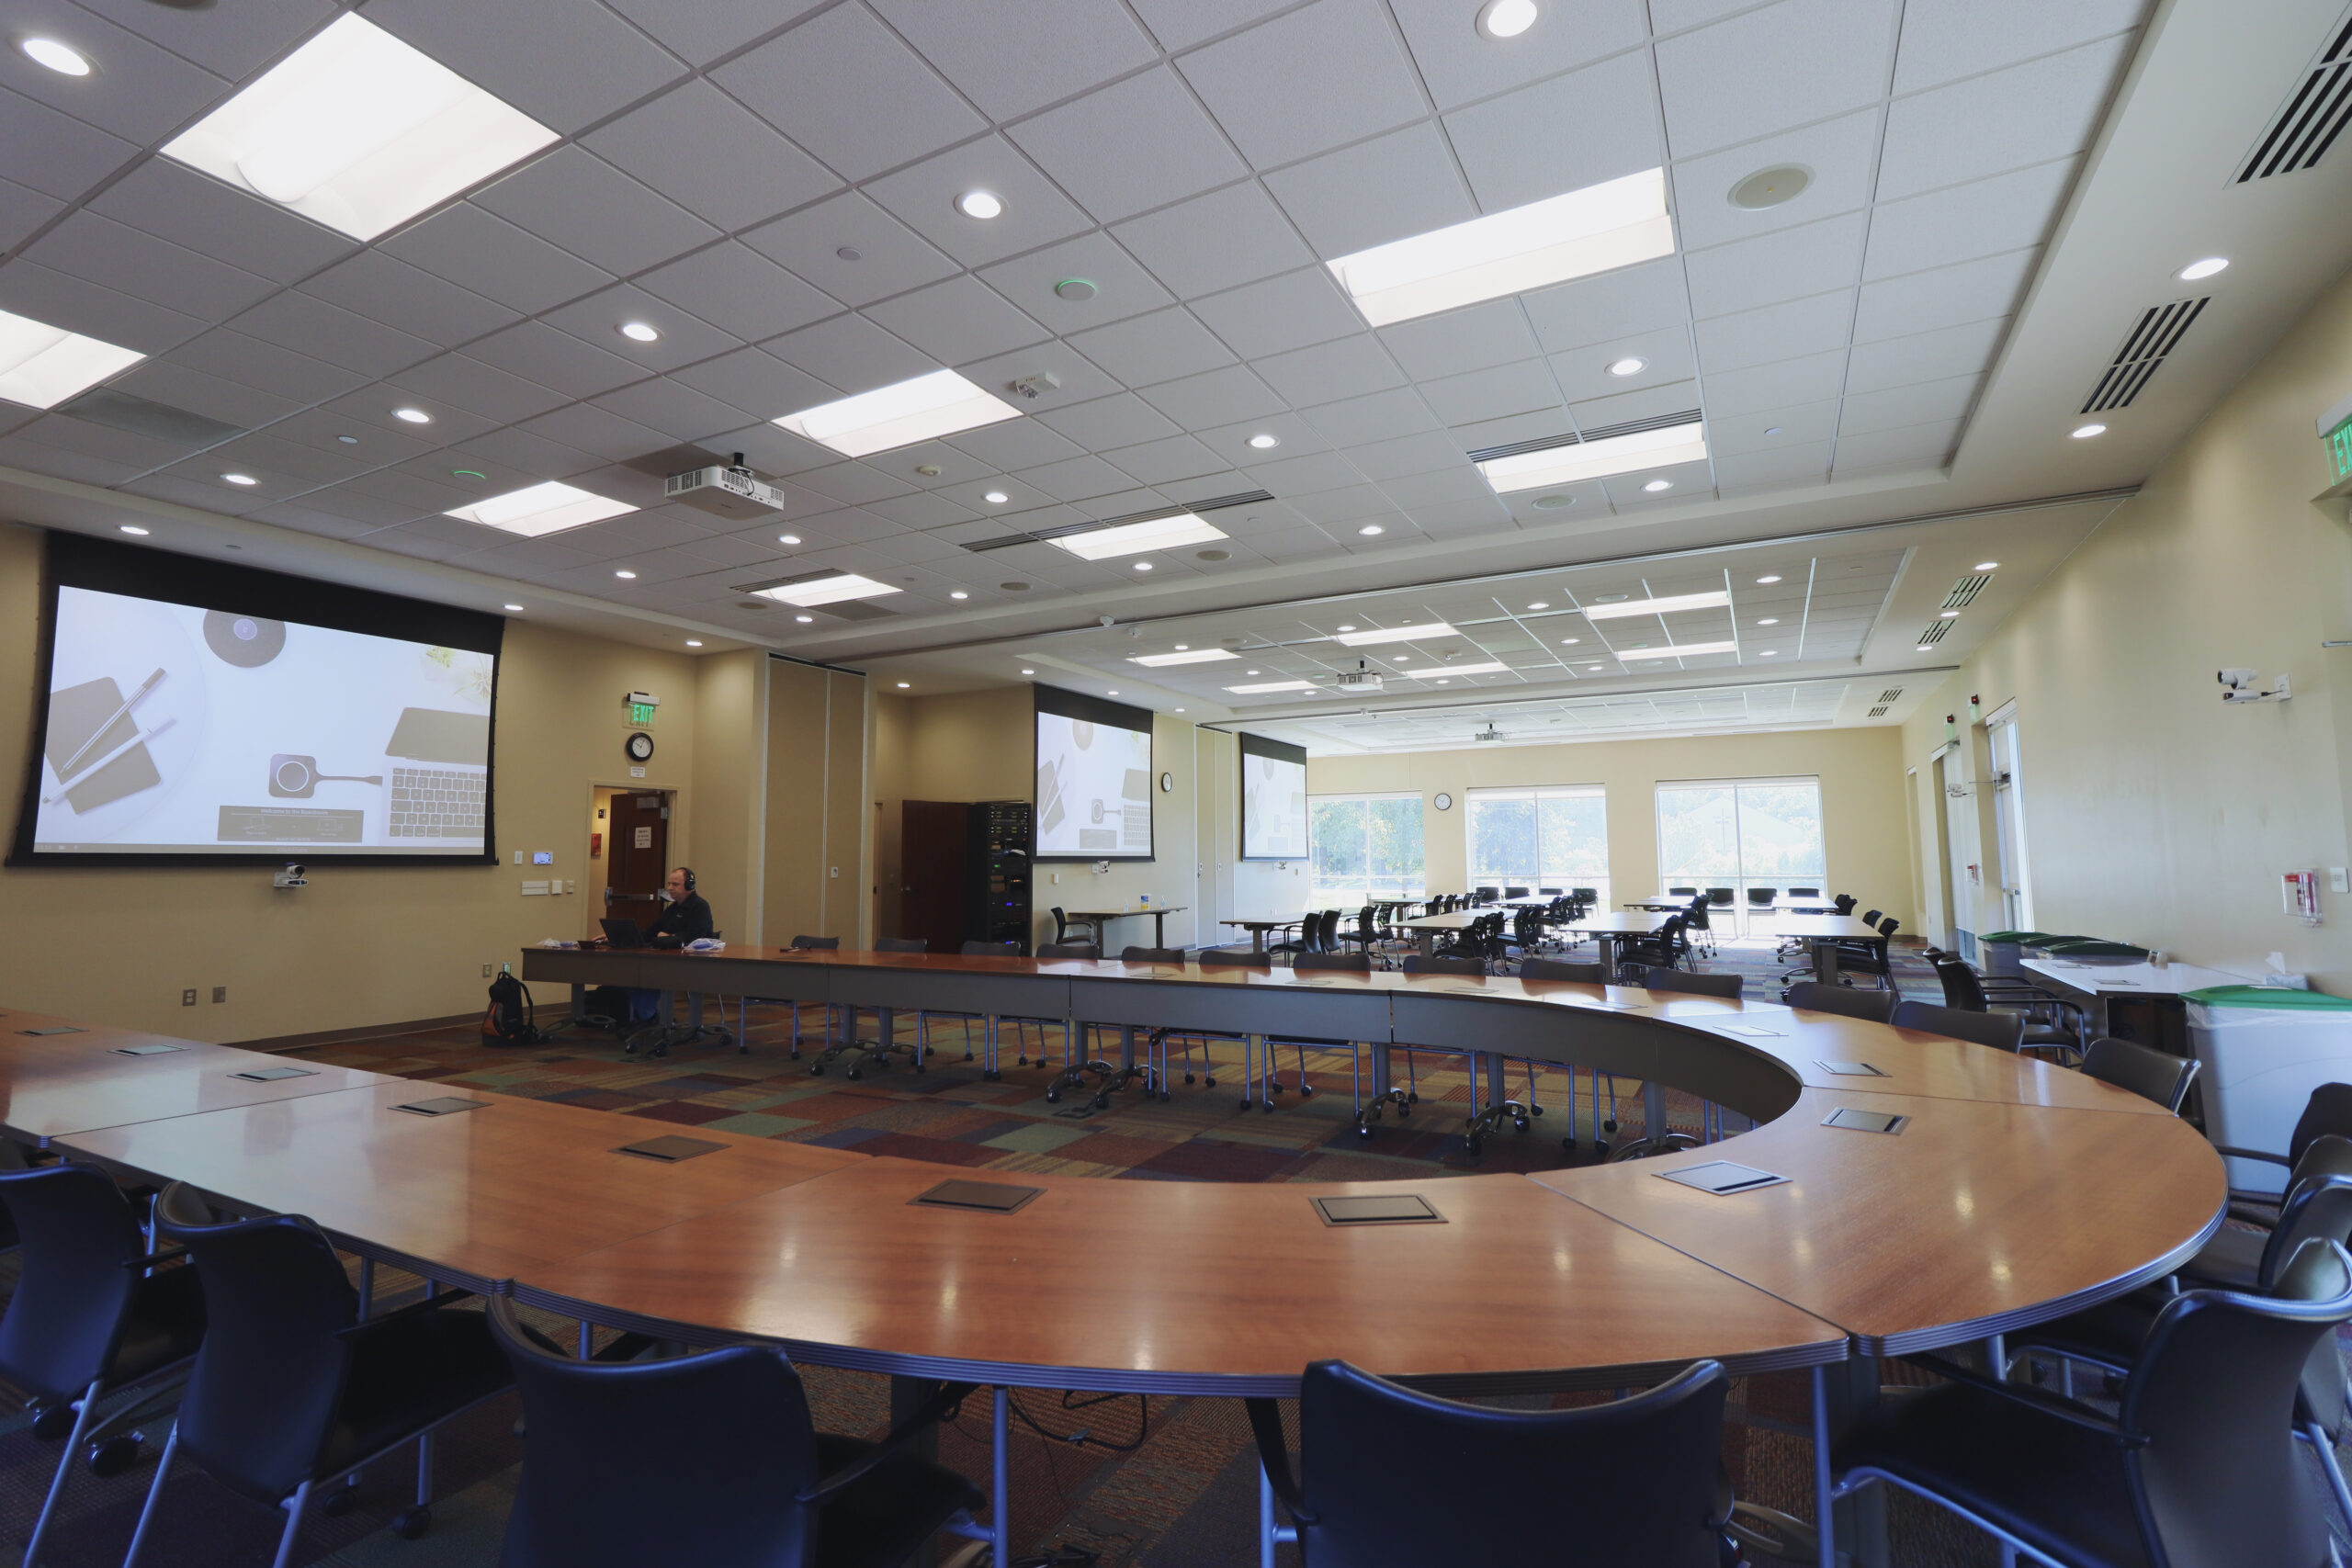 A very large conference space is opened up to show that all 3 rooms can be combined into one space and system. We are sitting on the Boardroom side looking over the table towards the other 2 spaces